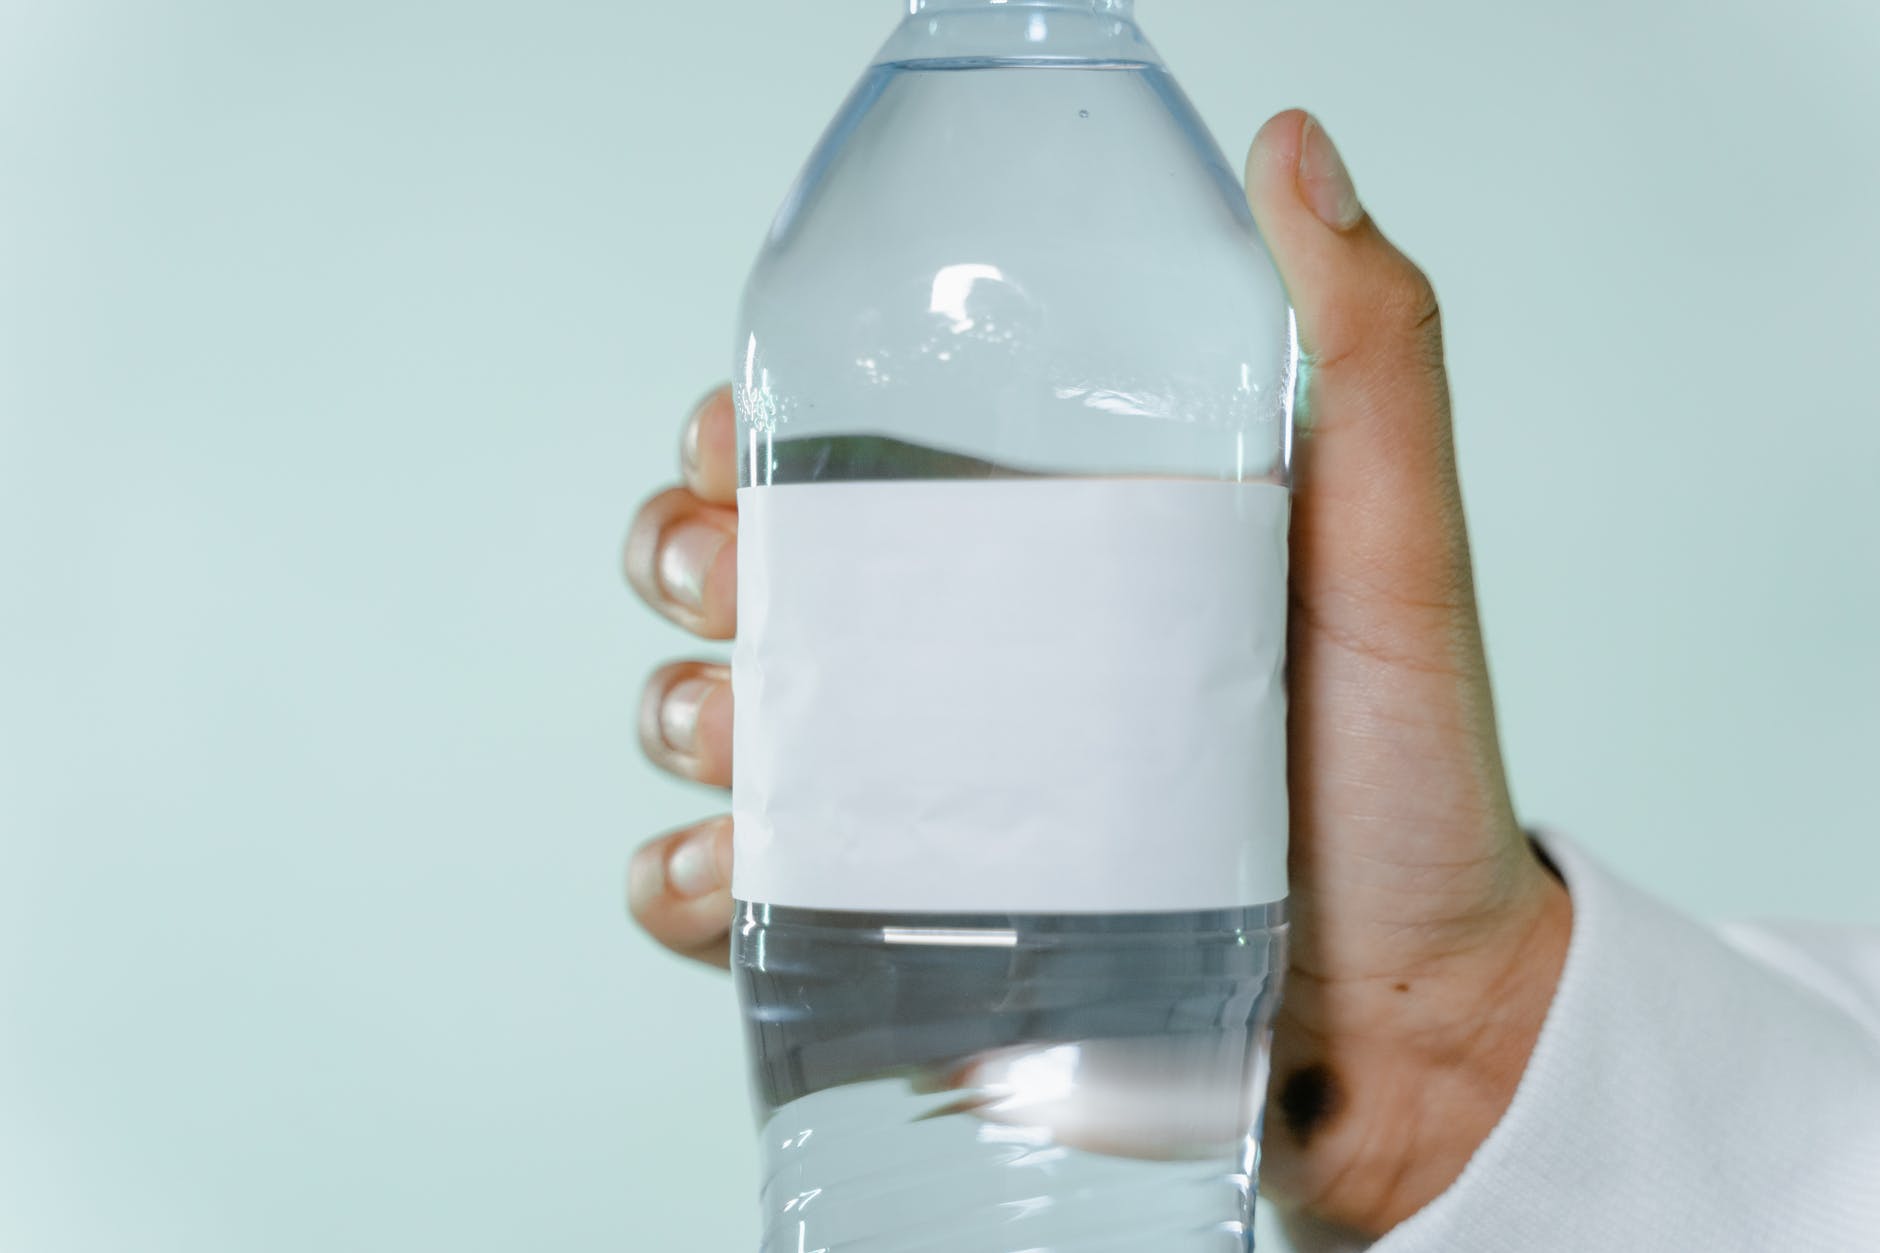 a person holding a water bottle with a blank label